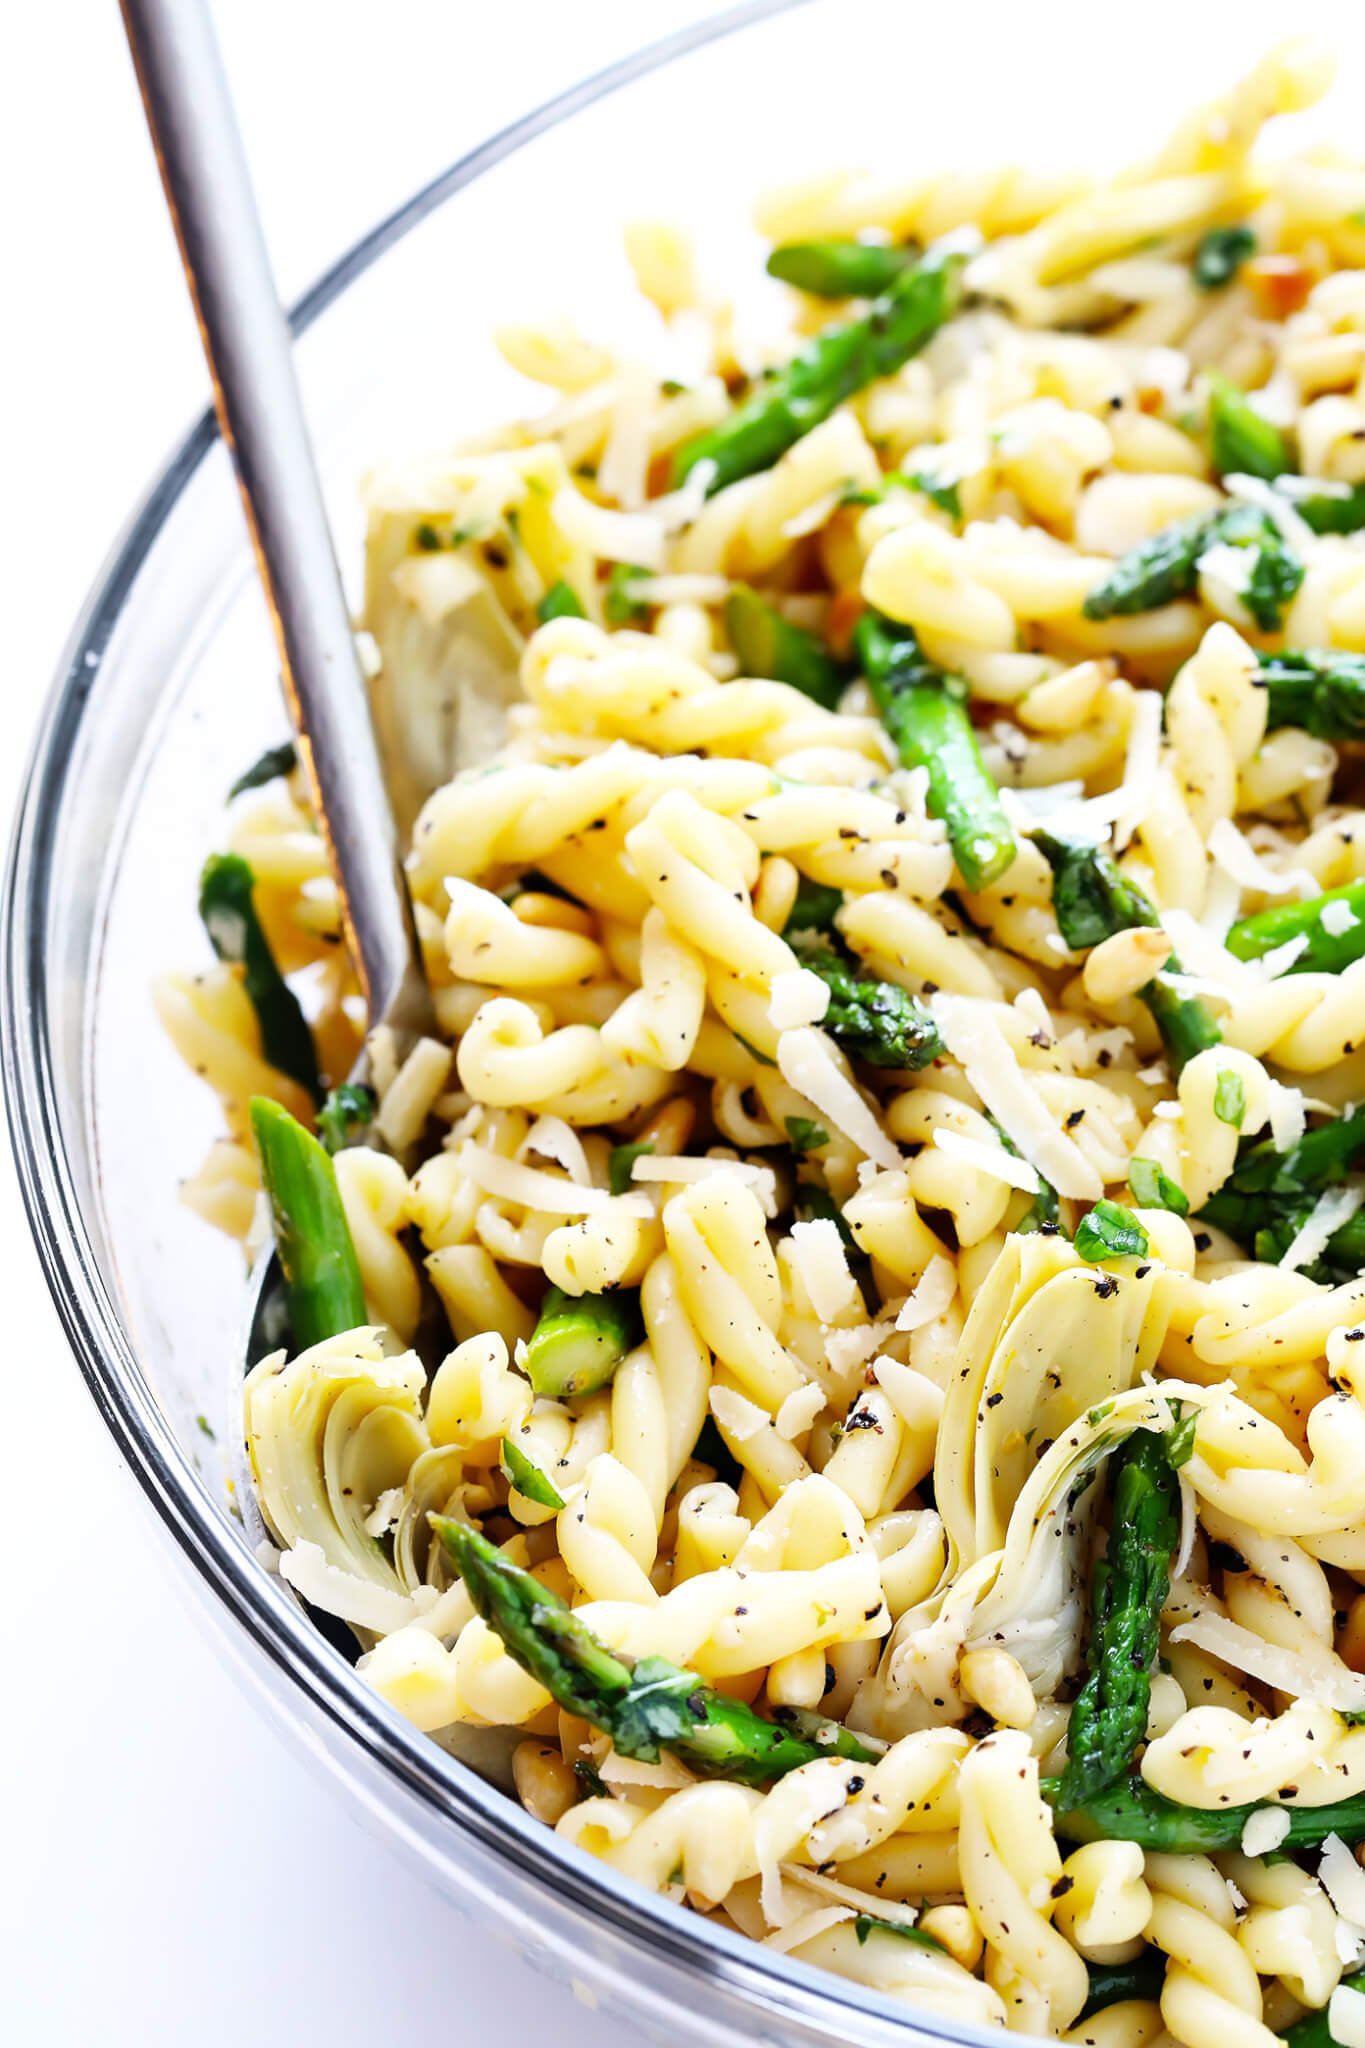 This delicious Lemon Artichoke Asparagus Pasta Salad is super simple to make, and full of the best fresh spring flavors! | gimmesomeoven.com